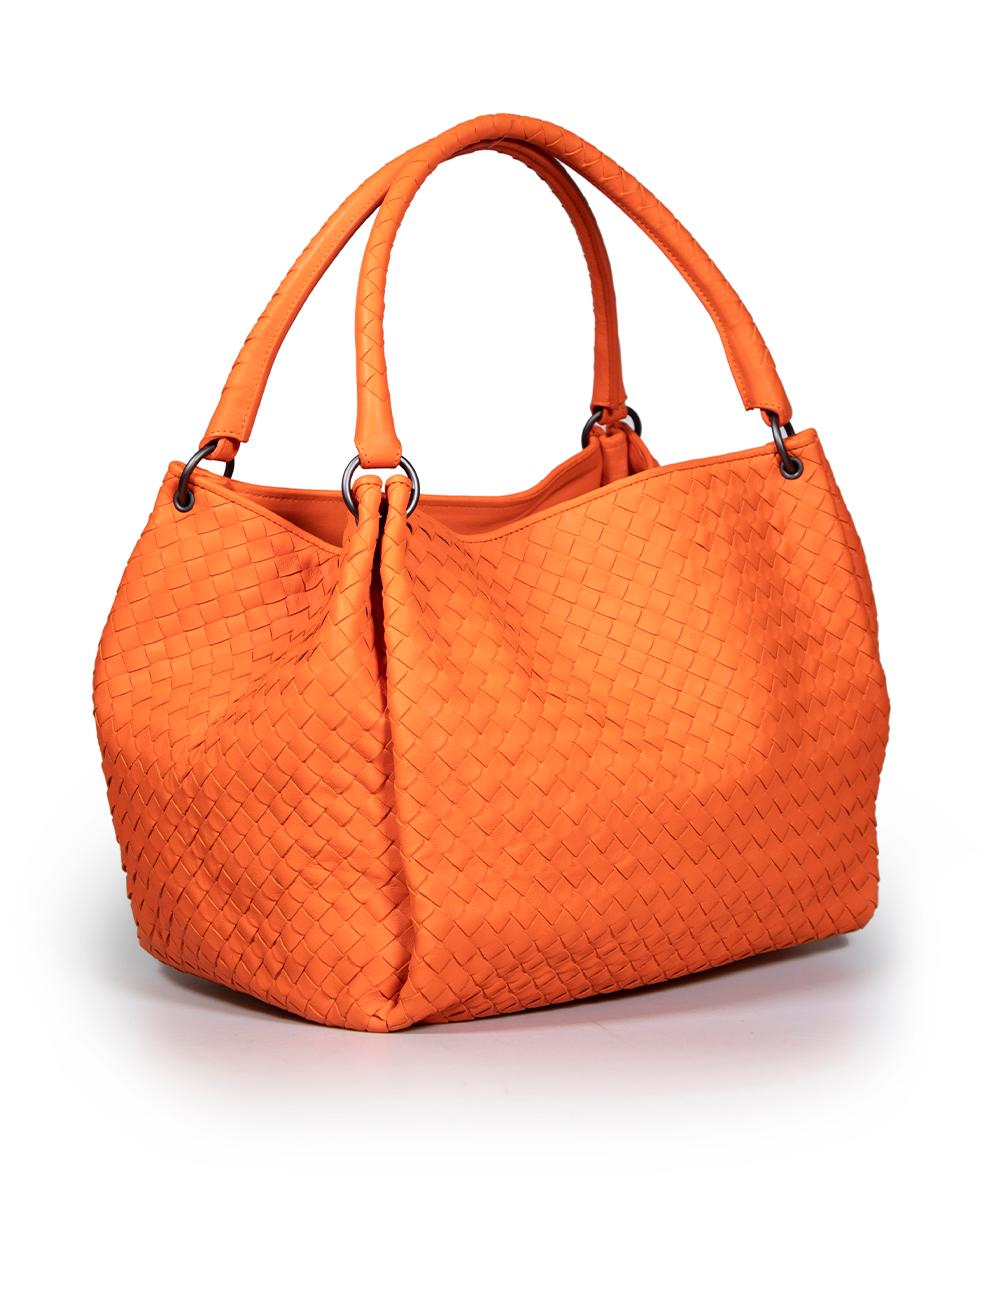 CONDITION is Very good. Hardly any visible wear to bag is evident on this used Bottega Veneta designer resale item. This bag comes with matching mirror.
 
 
 
 Details
 
 
 Orange
 
 Leather
 
 Medium Parachute bag
 
 Intrecciato weave
 
 Black tone